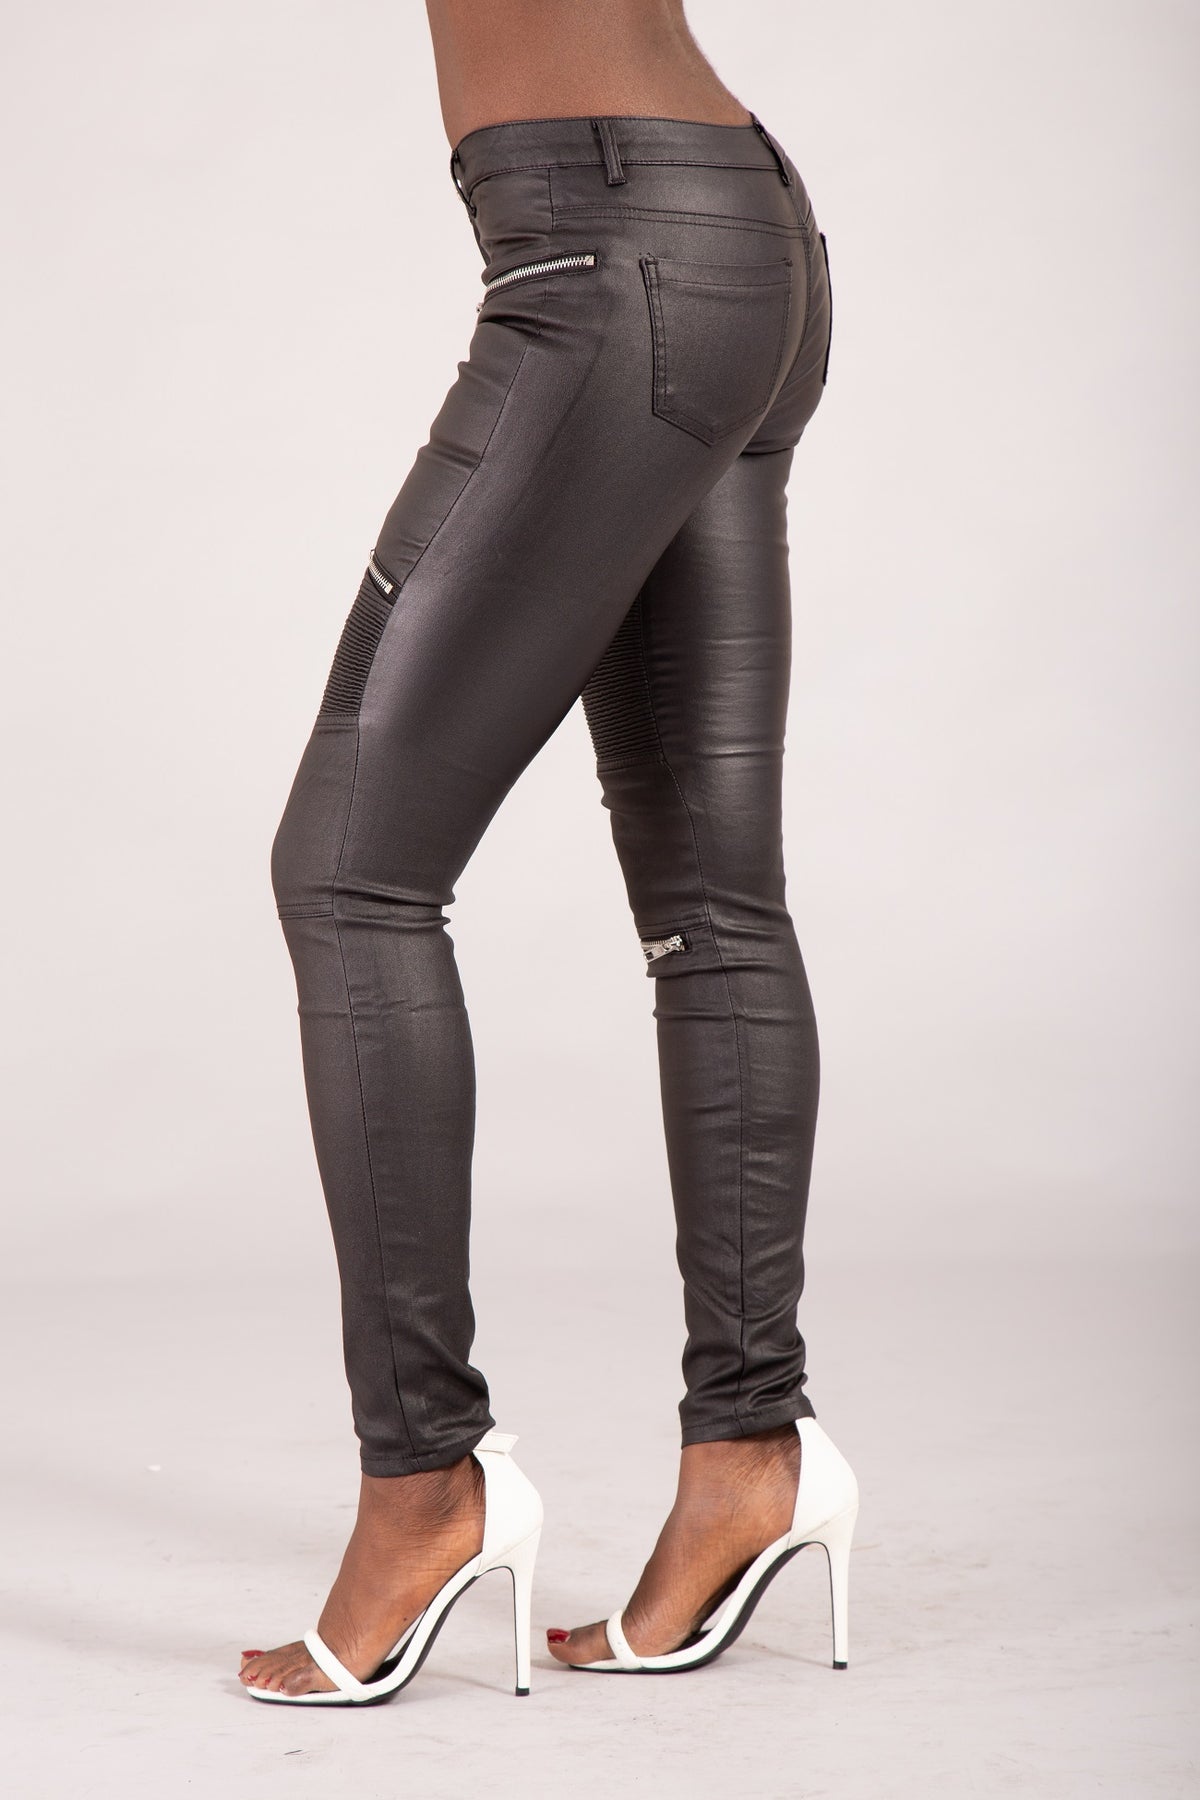 Leather Look Skinny Fit Jeans with Zips for Women – Lusty Chic